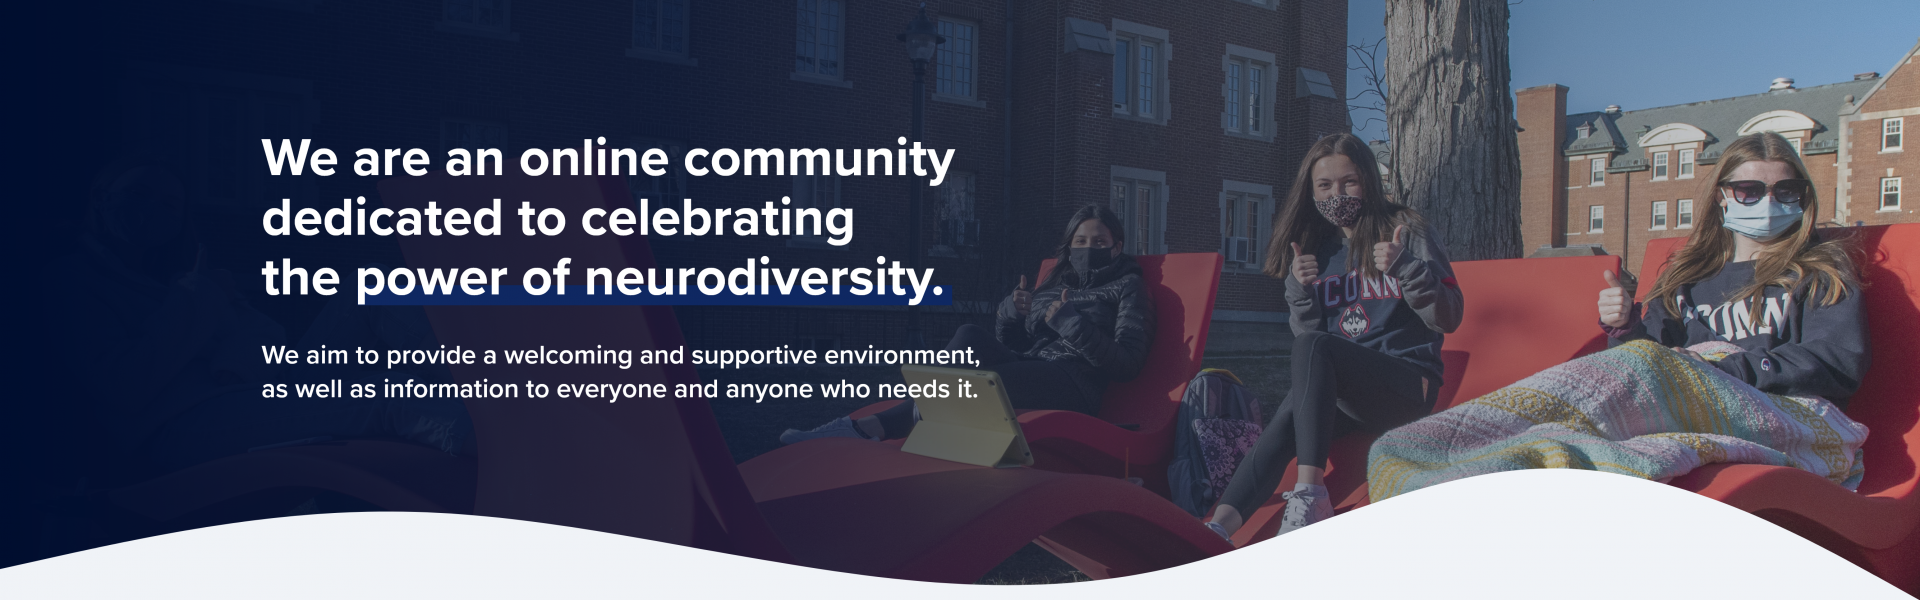 We are an online community dedicated to celebrating the power of neurodiversity. We aim to provide a welcoming and supportive environment, as well as information to everyone and anyone who needs it.